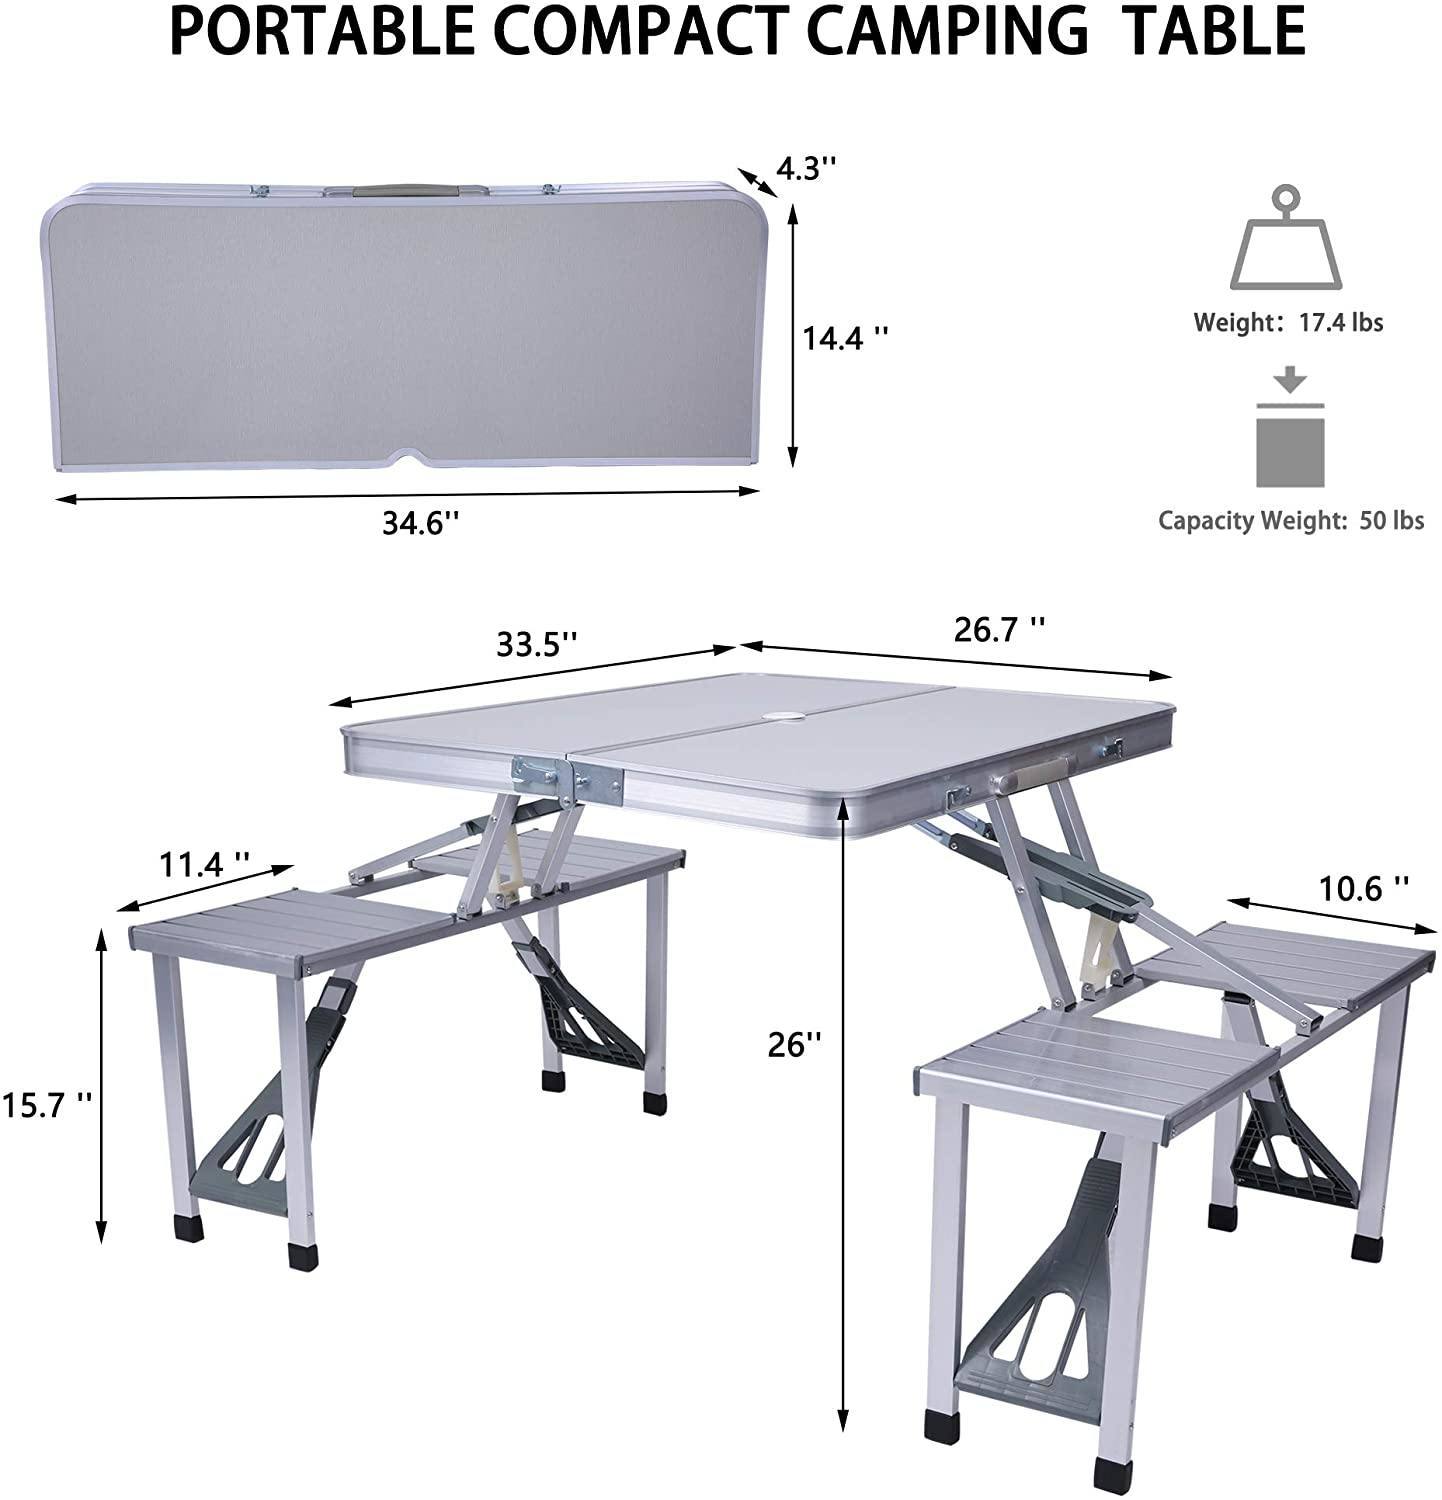 Picnic Table Folding Camping Table Chair Set with 4 Seats Chairs and Umbrella Hole - image 3 of 5